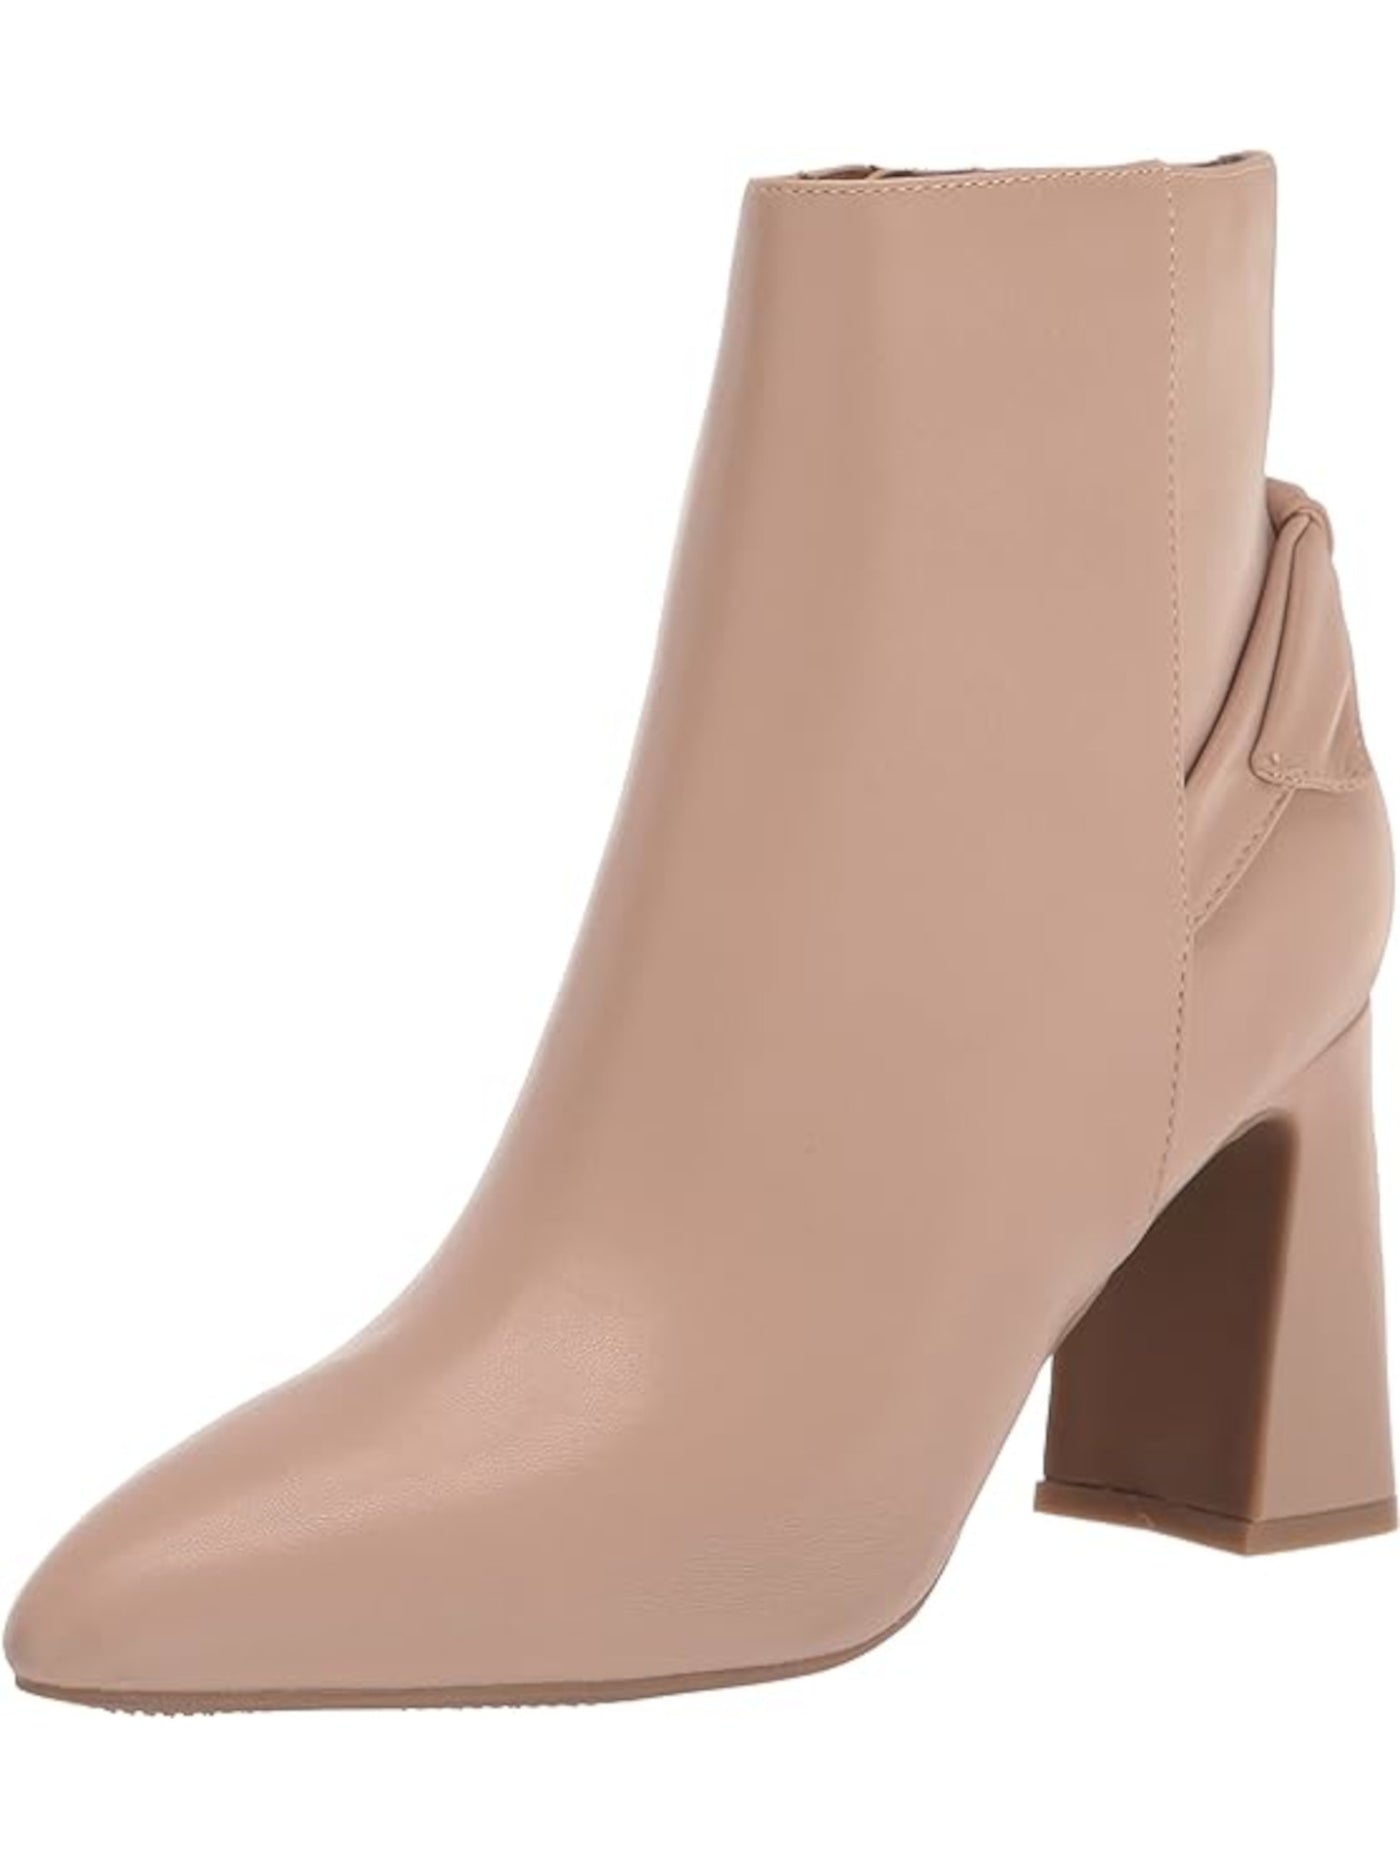 BANDOLINO Womens Pink Padded Bow Accent Kendra Pointed Toe Block Heel Zip-Up Dress Booties 8.5 M